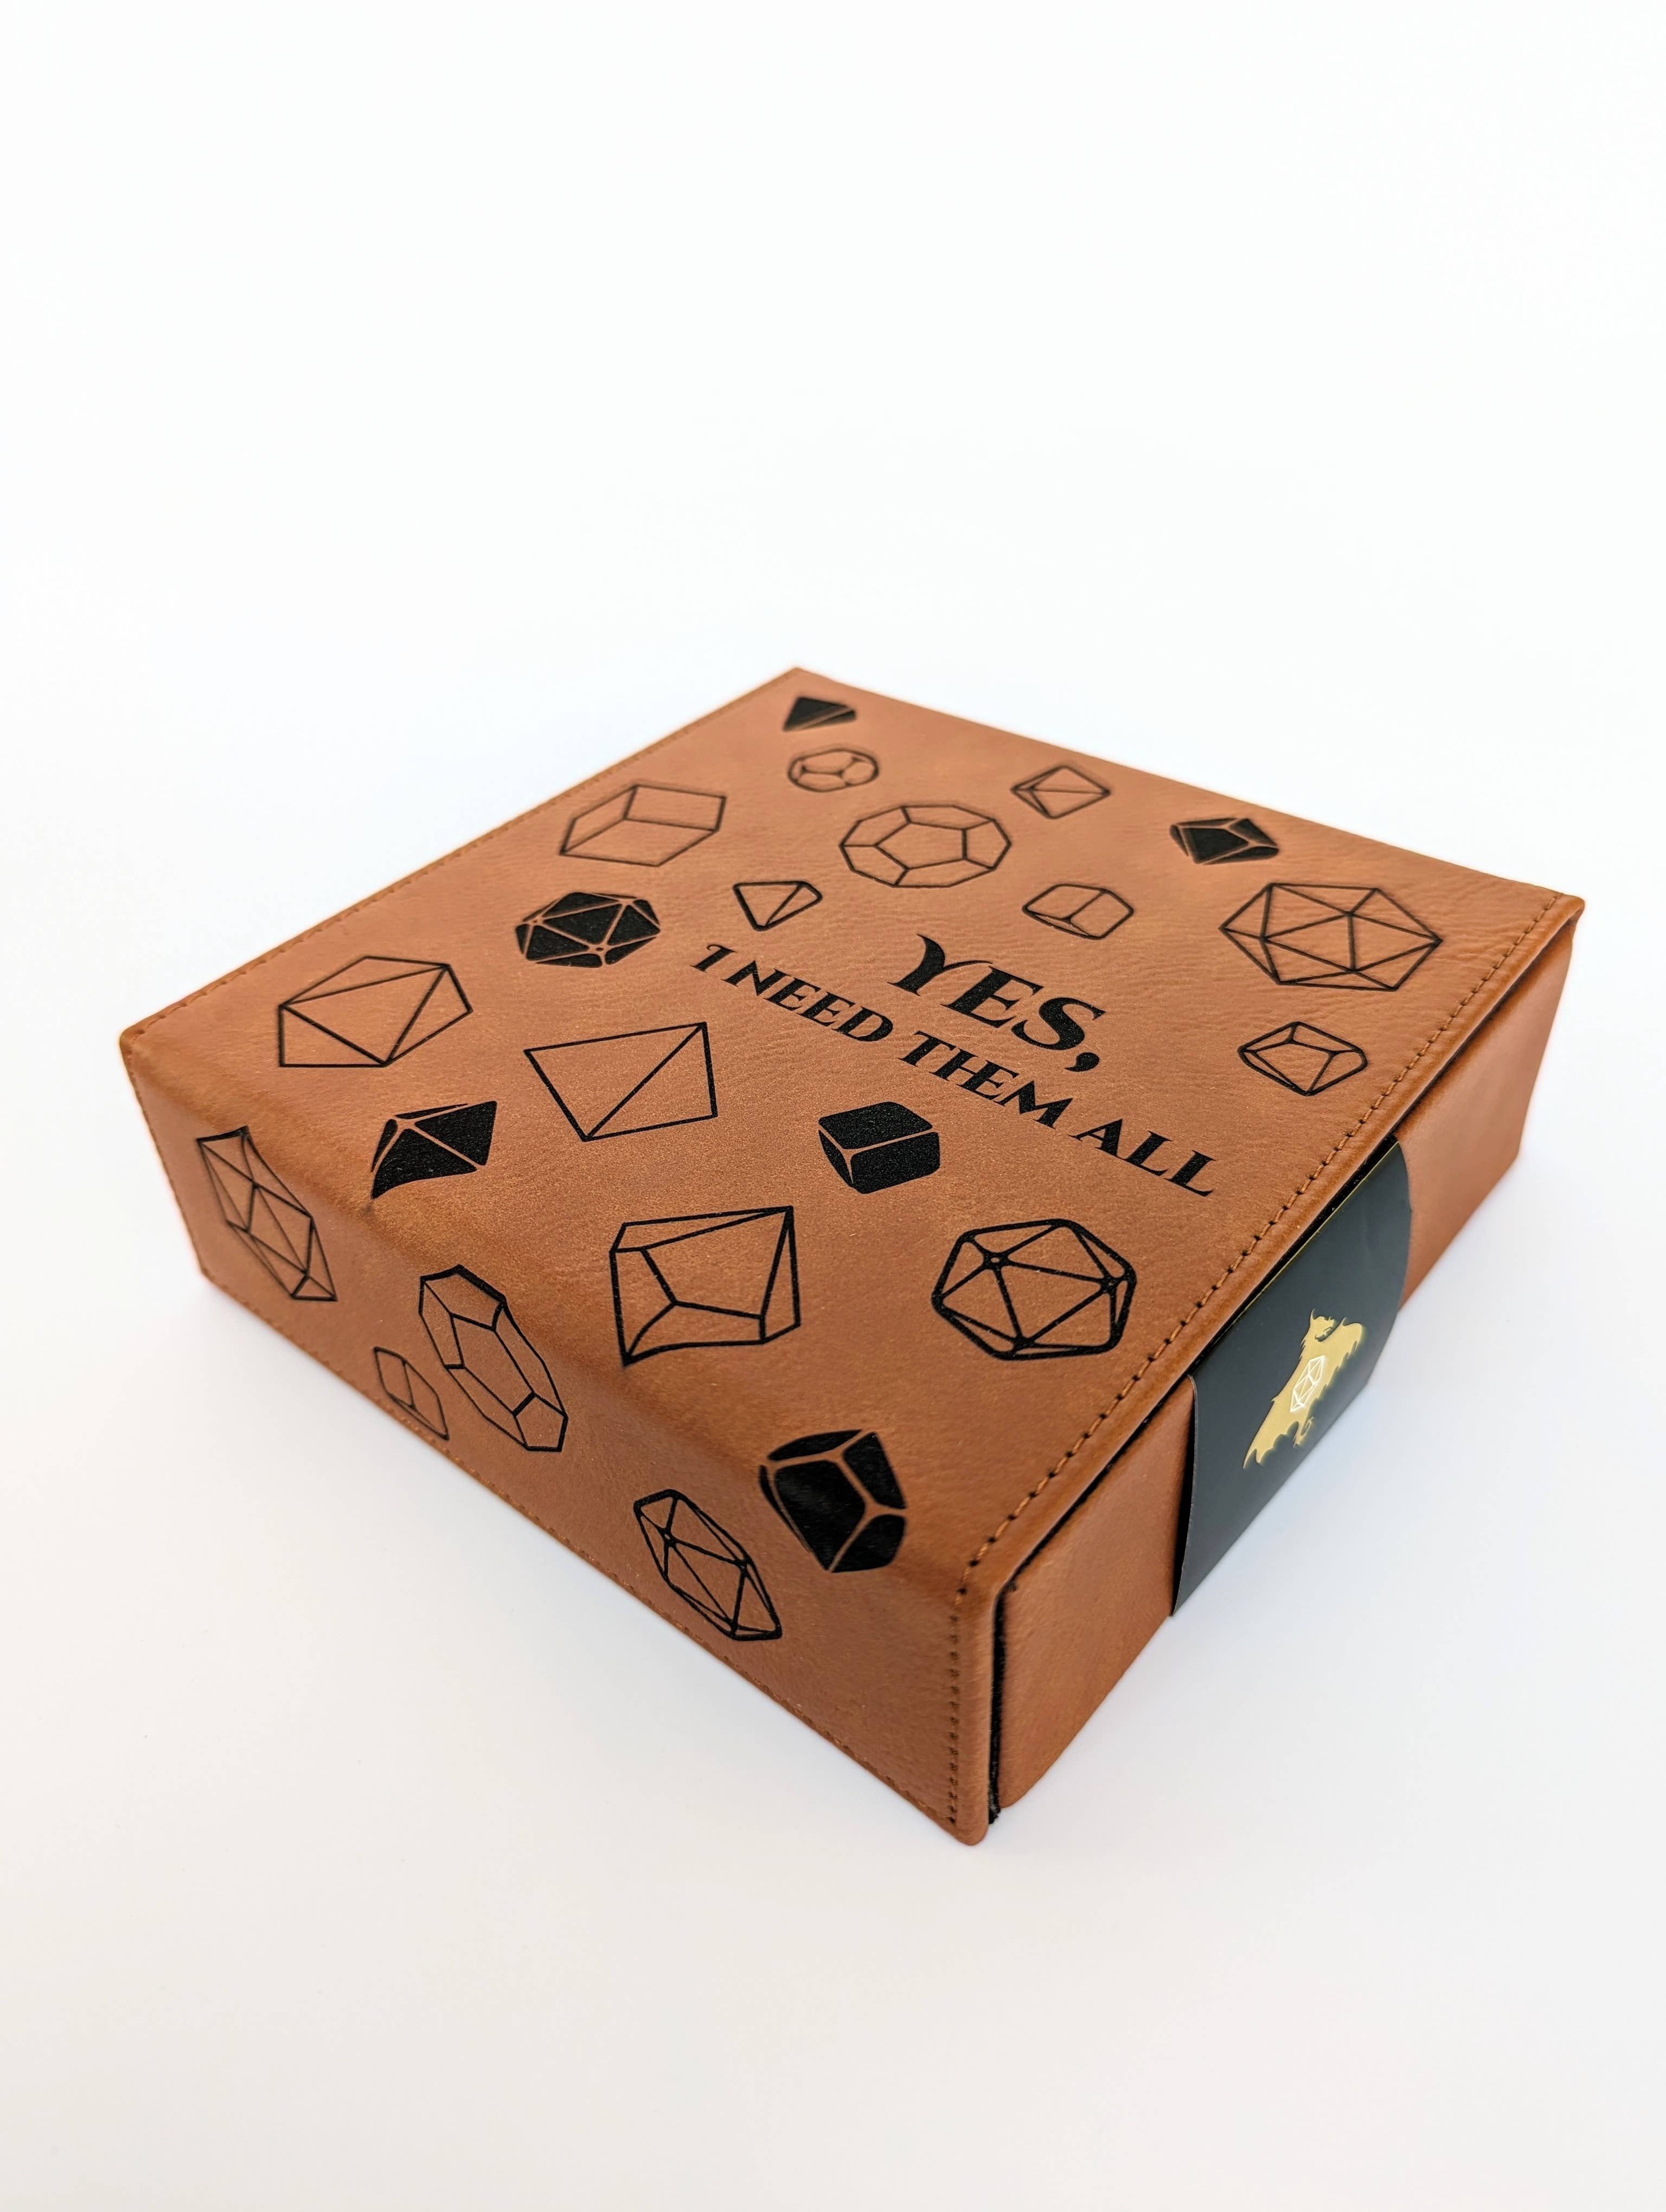 NTSD Gaming and Bookish Goods - *NEW* Yes, I Need Them All - D&D - Vegan Leather Dice Box - Bards & Cards